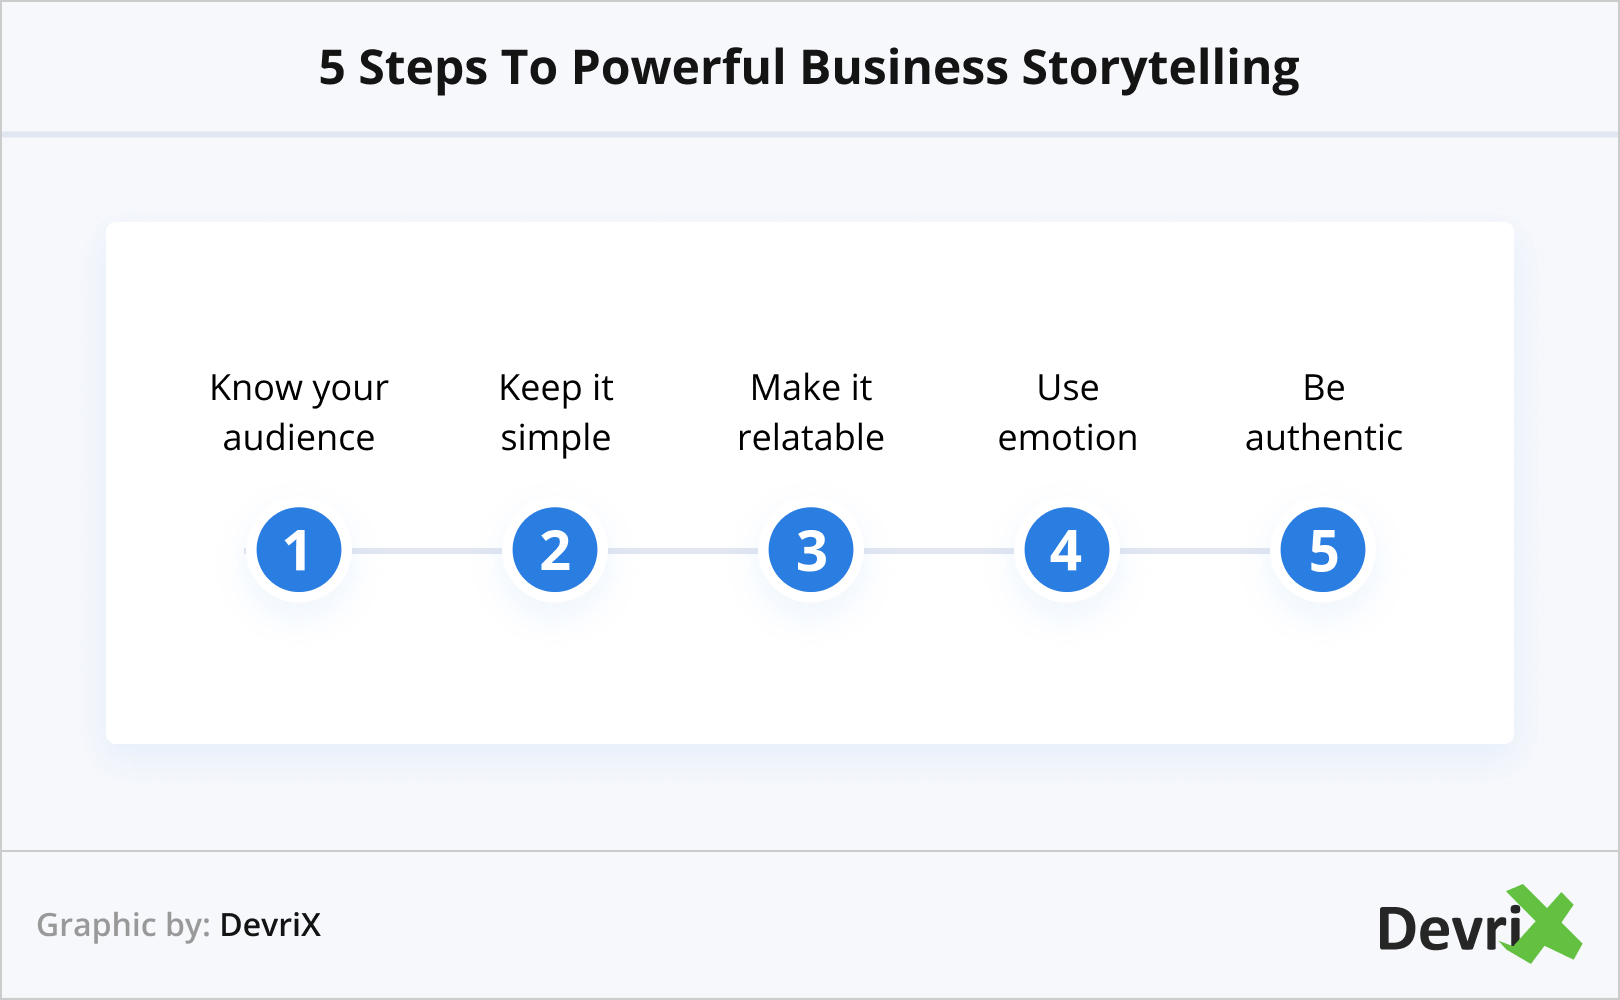 5 Steps To Powerful Business Storytelling